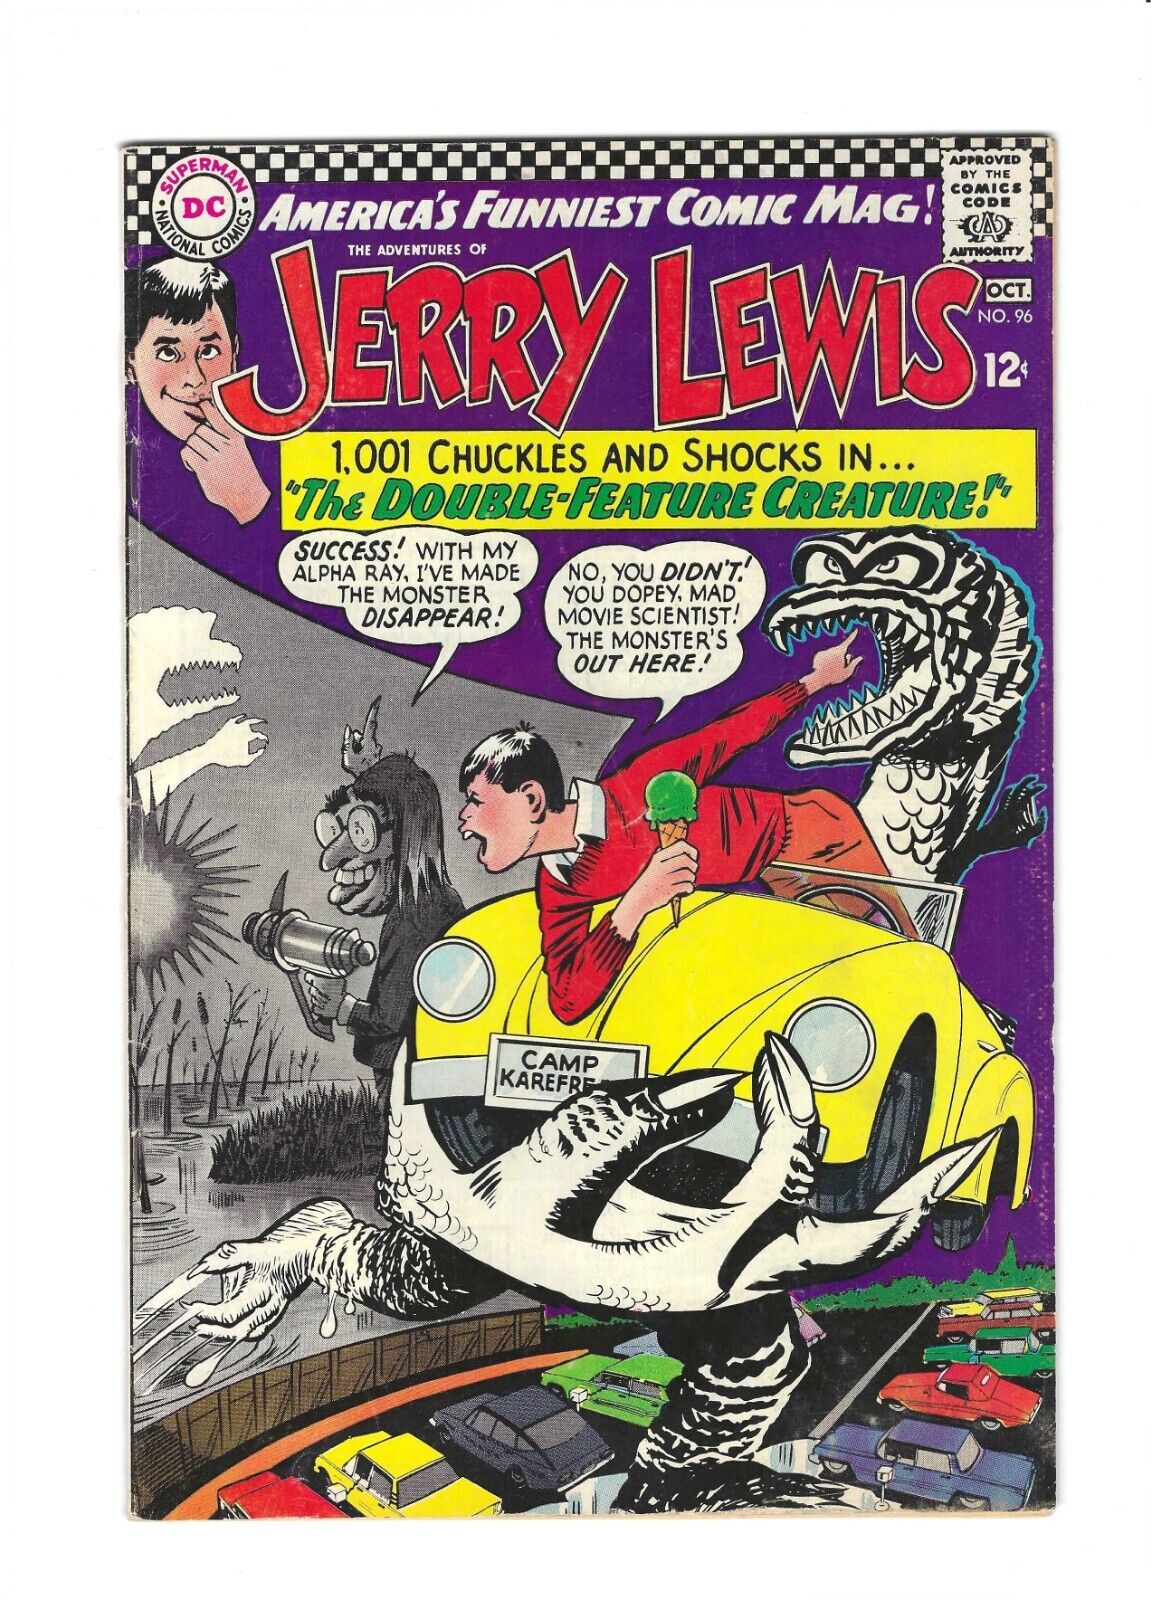 The Adventures of Jerry Lewis #96: Dry Cleaned: Pressed: Bagged: Boarded: F-VF 7